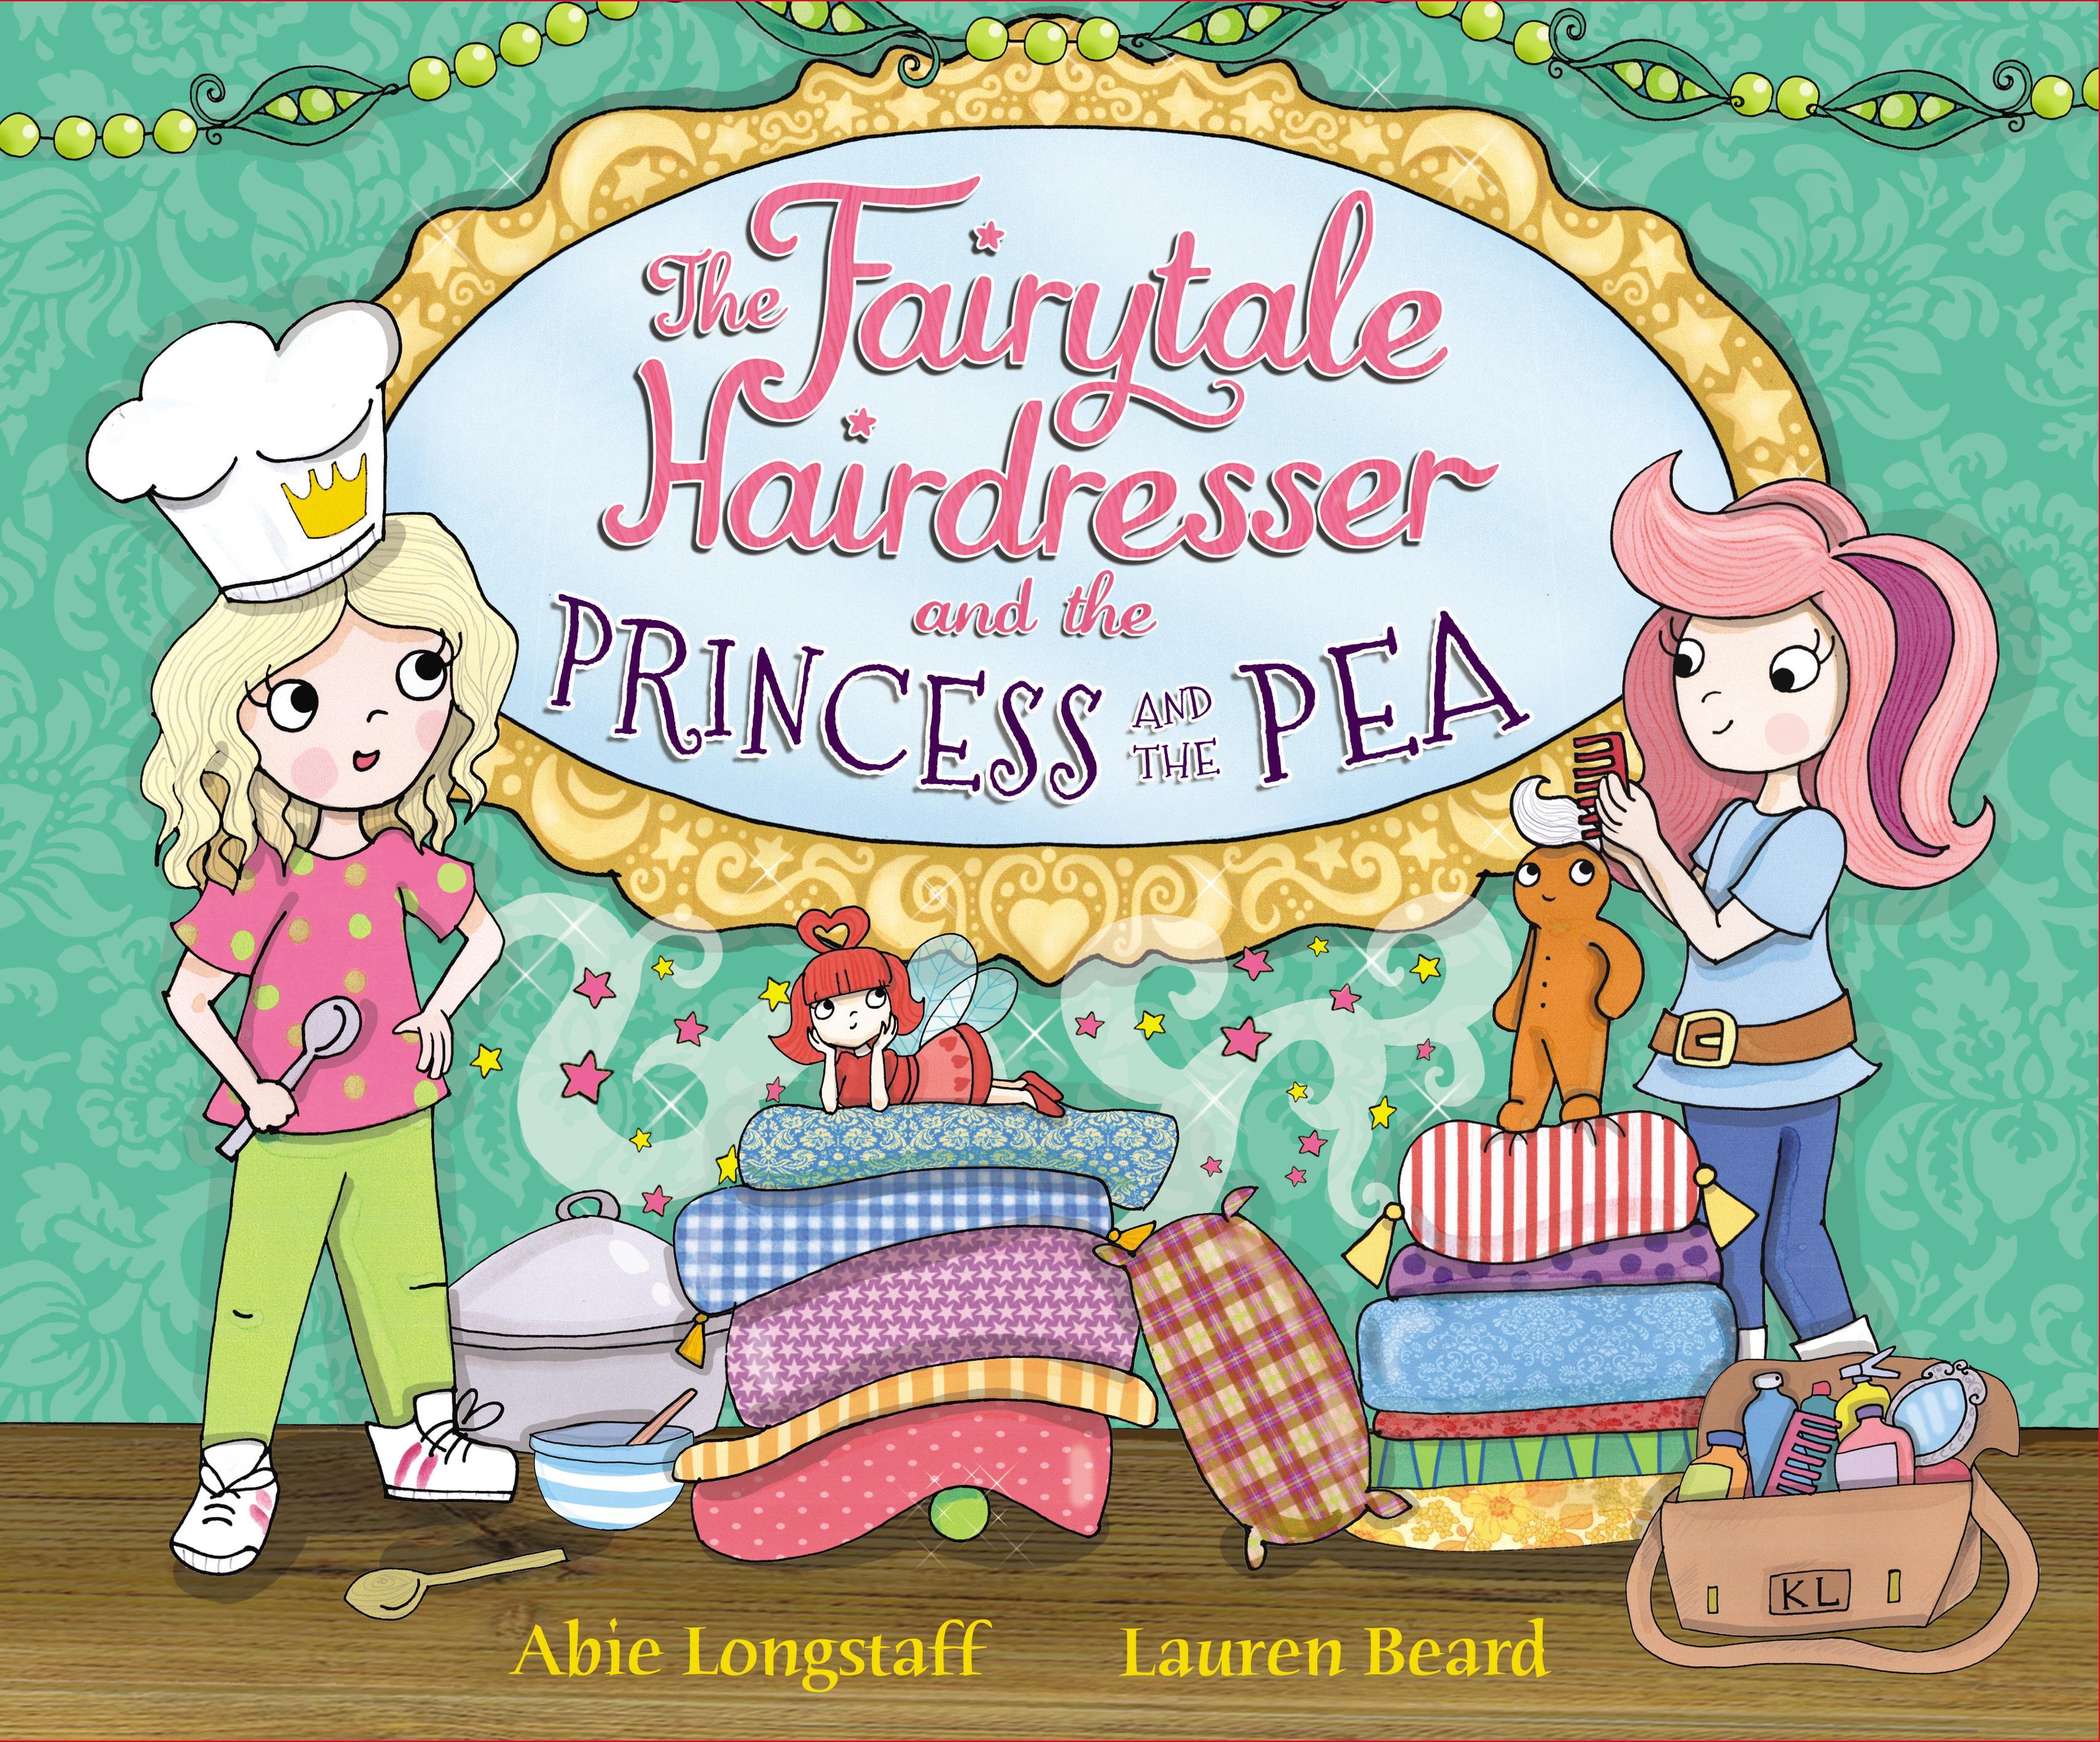 Fairytale Hairdresser and the Princess and the Pea - Abie Longstaff